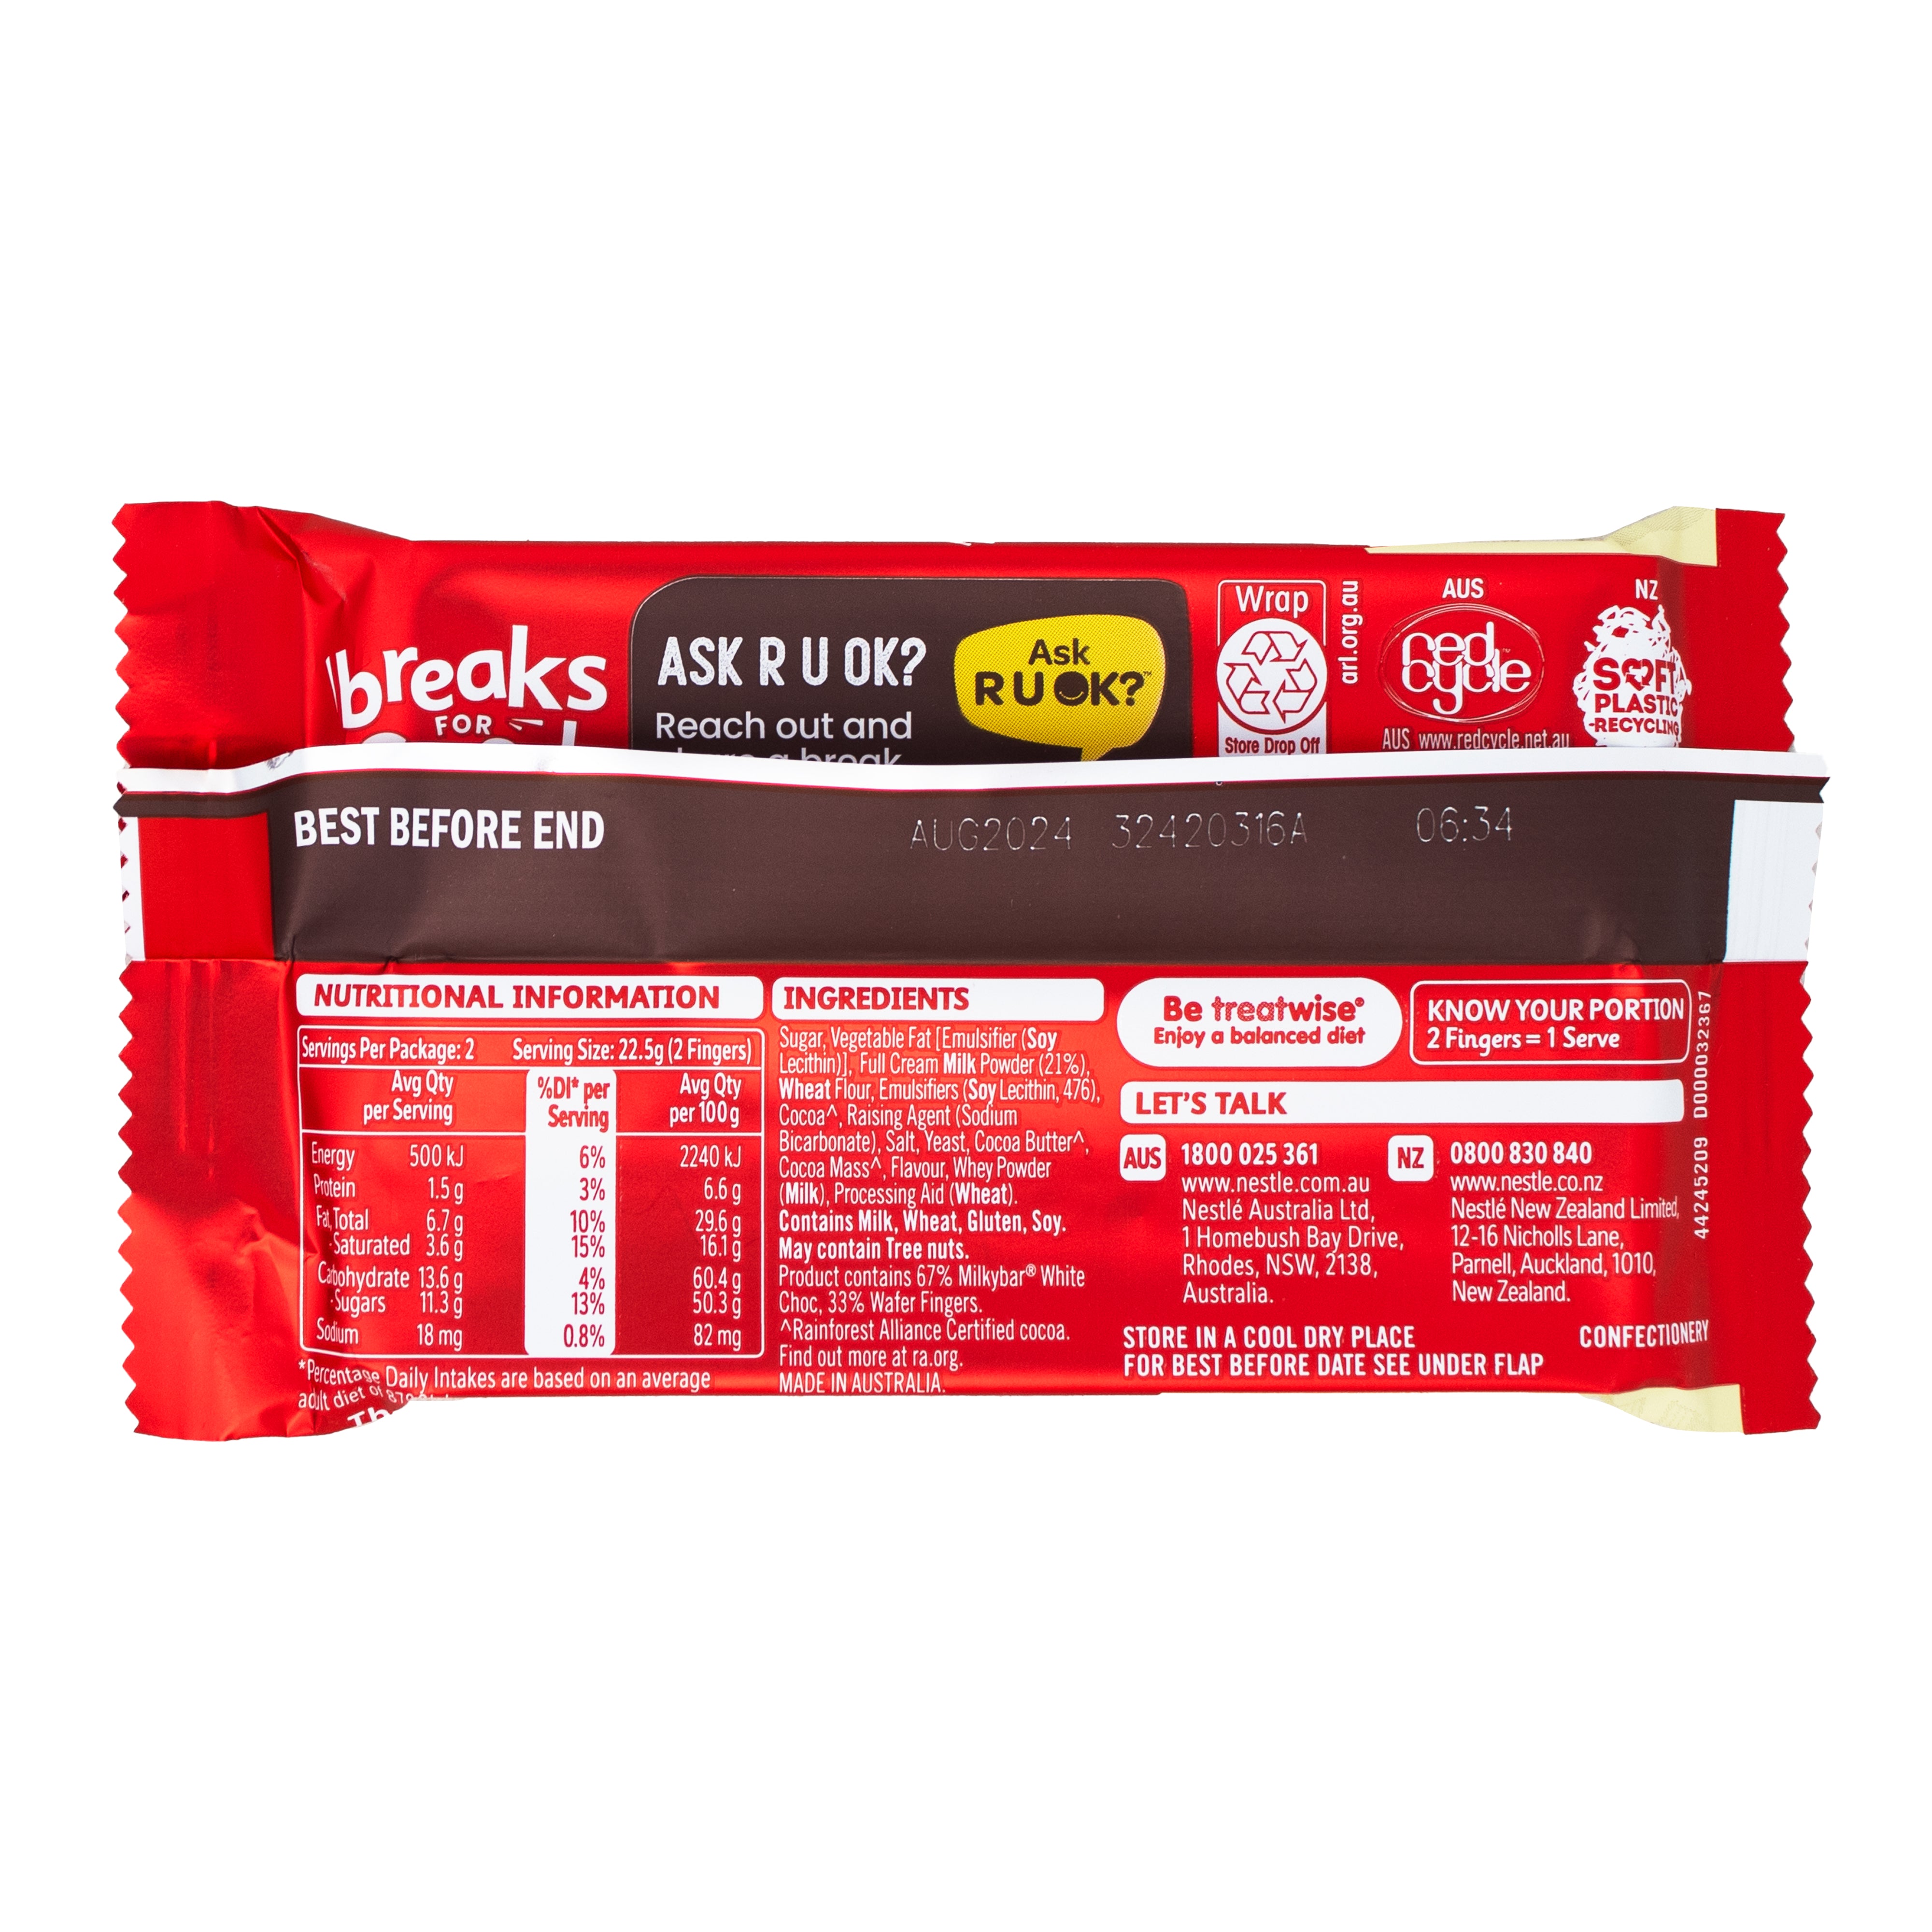 Kit Kat Milky Bar (Aus) - 45g Nutrition Facts Ingredients - Kit Kat Milky Bar - Australian Candy Delight - Creamy White Chocolate - Crispy Wafer Layers - Chocolate Wafer Treat - International Candy Sensation - Unique Flavour Blend - Australian Chocolate Excellence